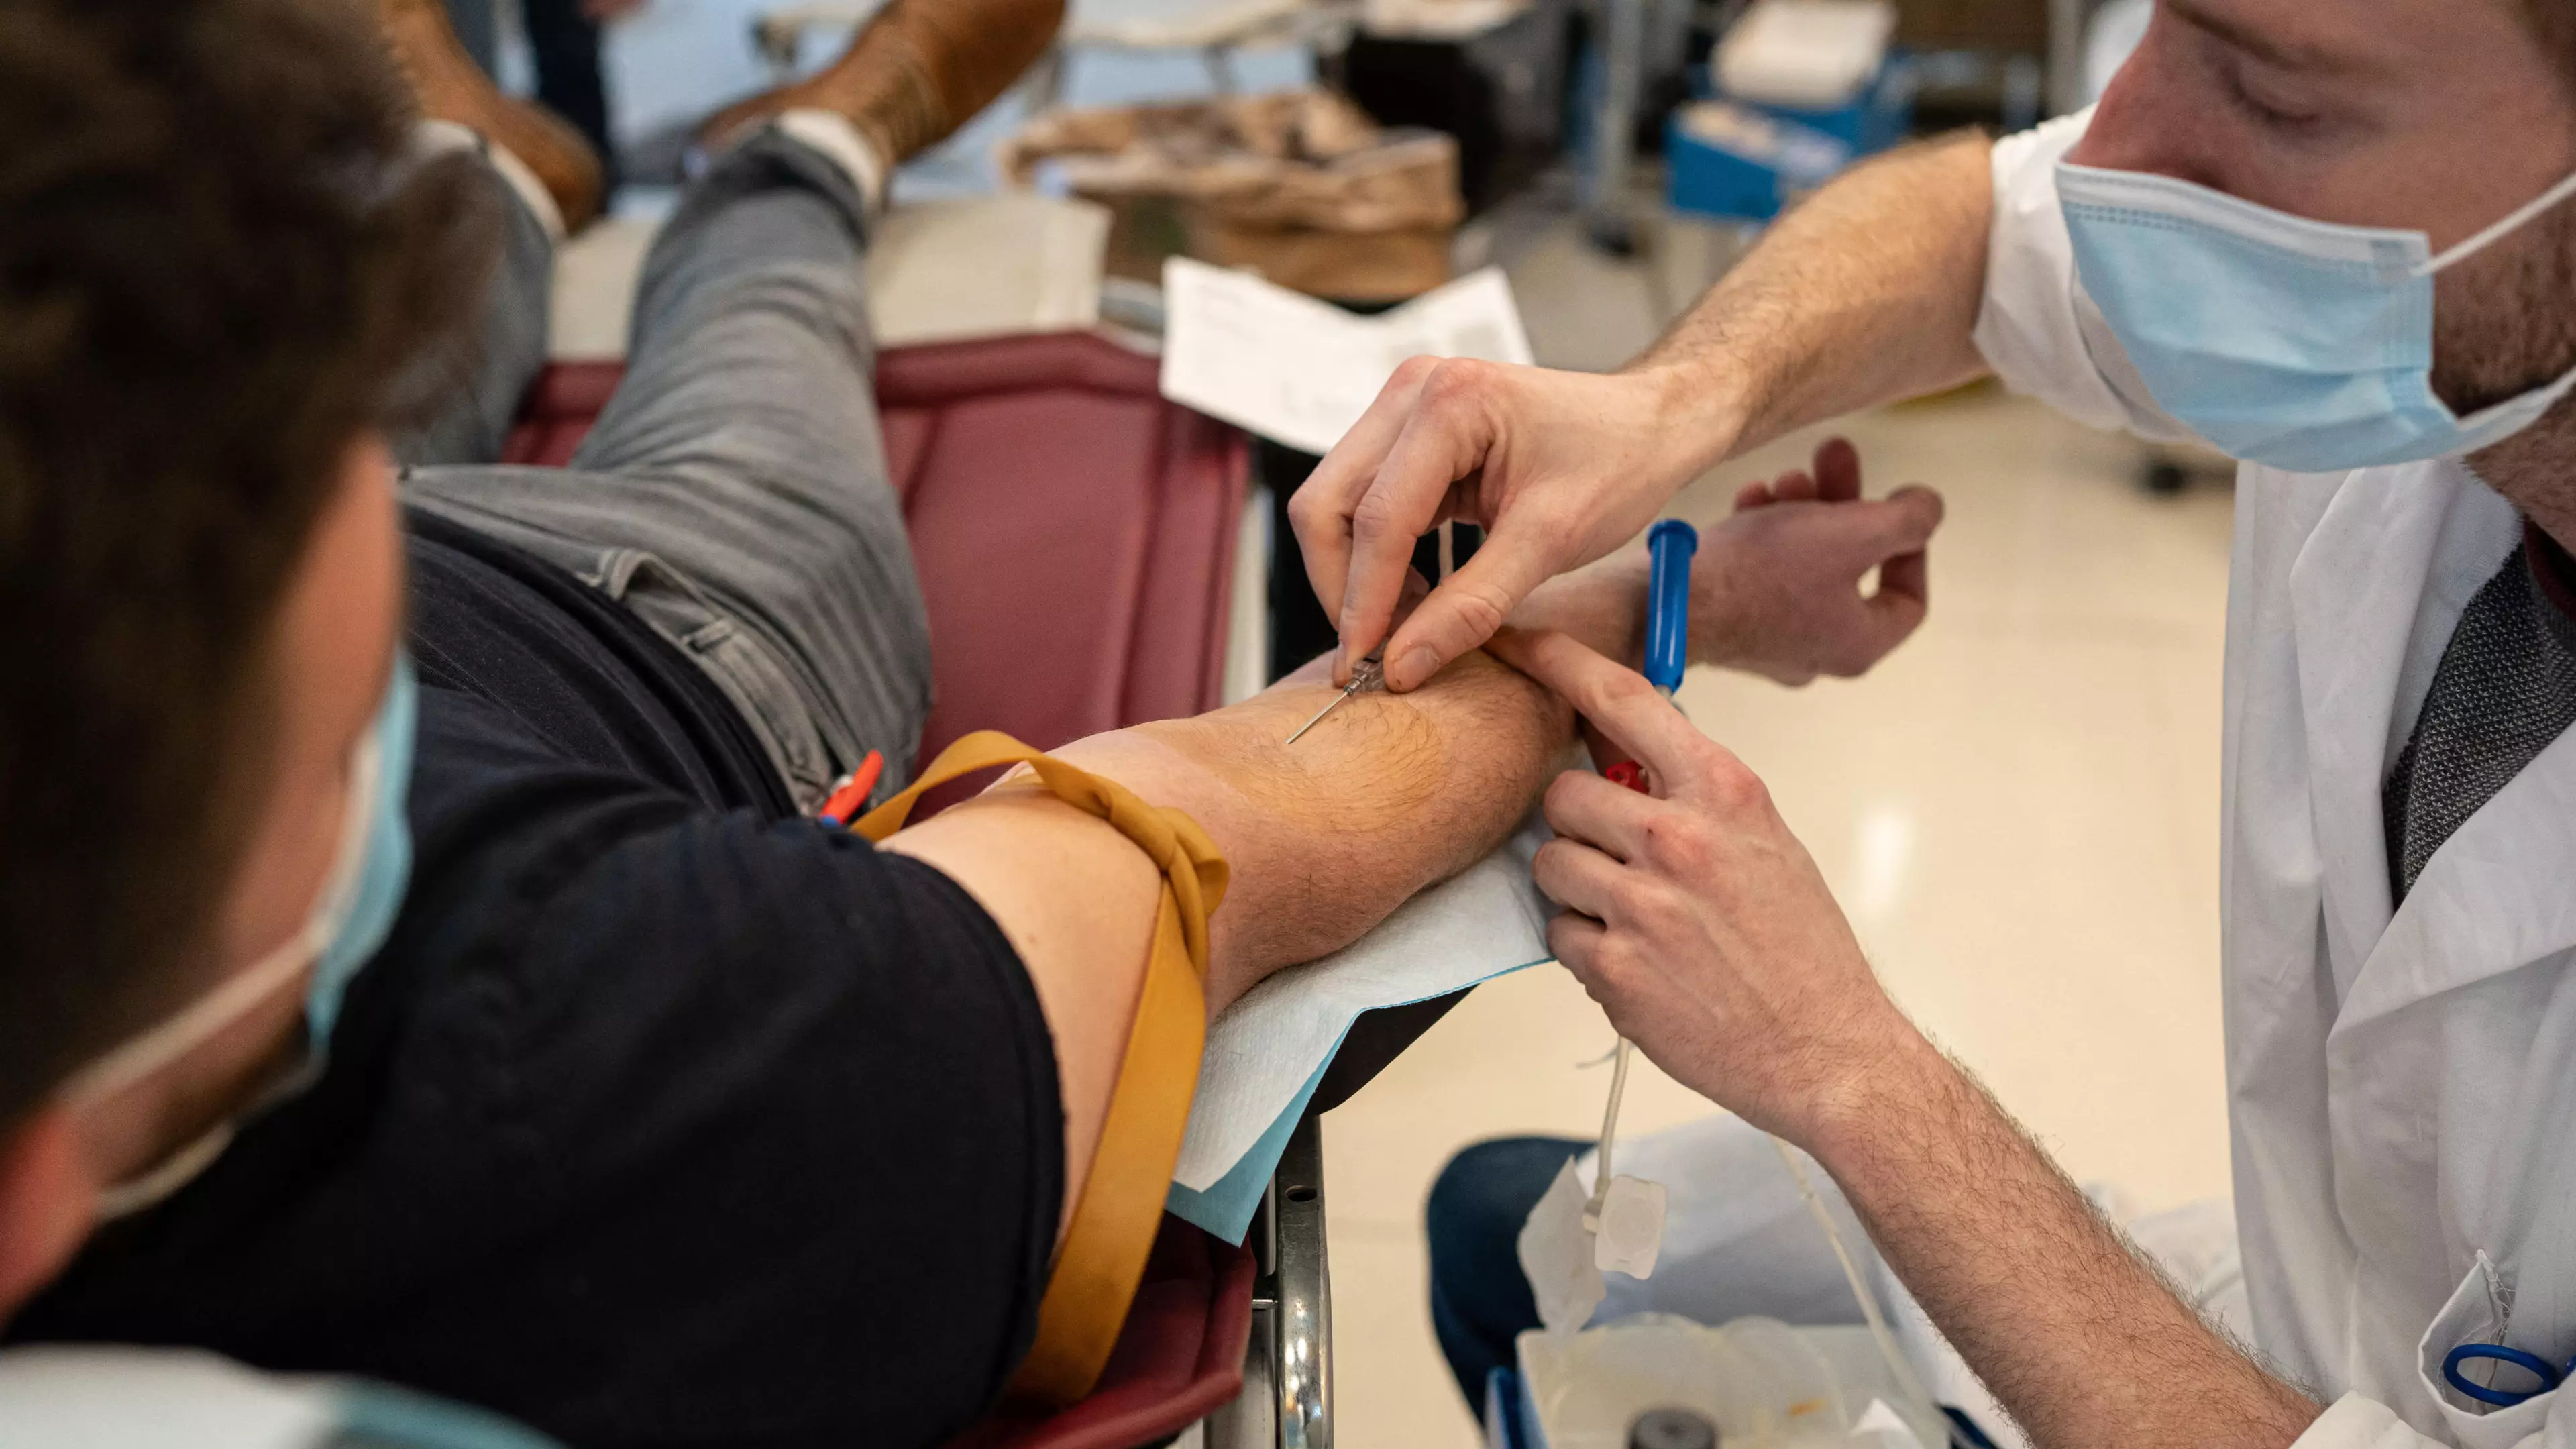 Gay Men Will Now Be Allowed To Donate Blood In Australia If They're Celibate For 3 Months